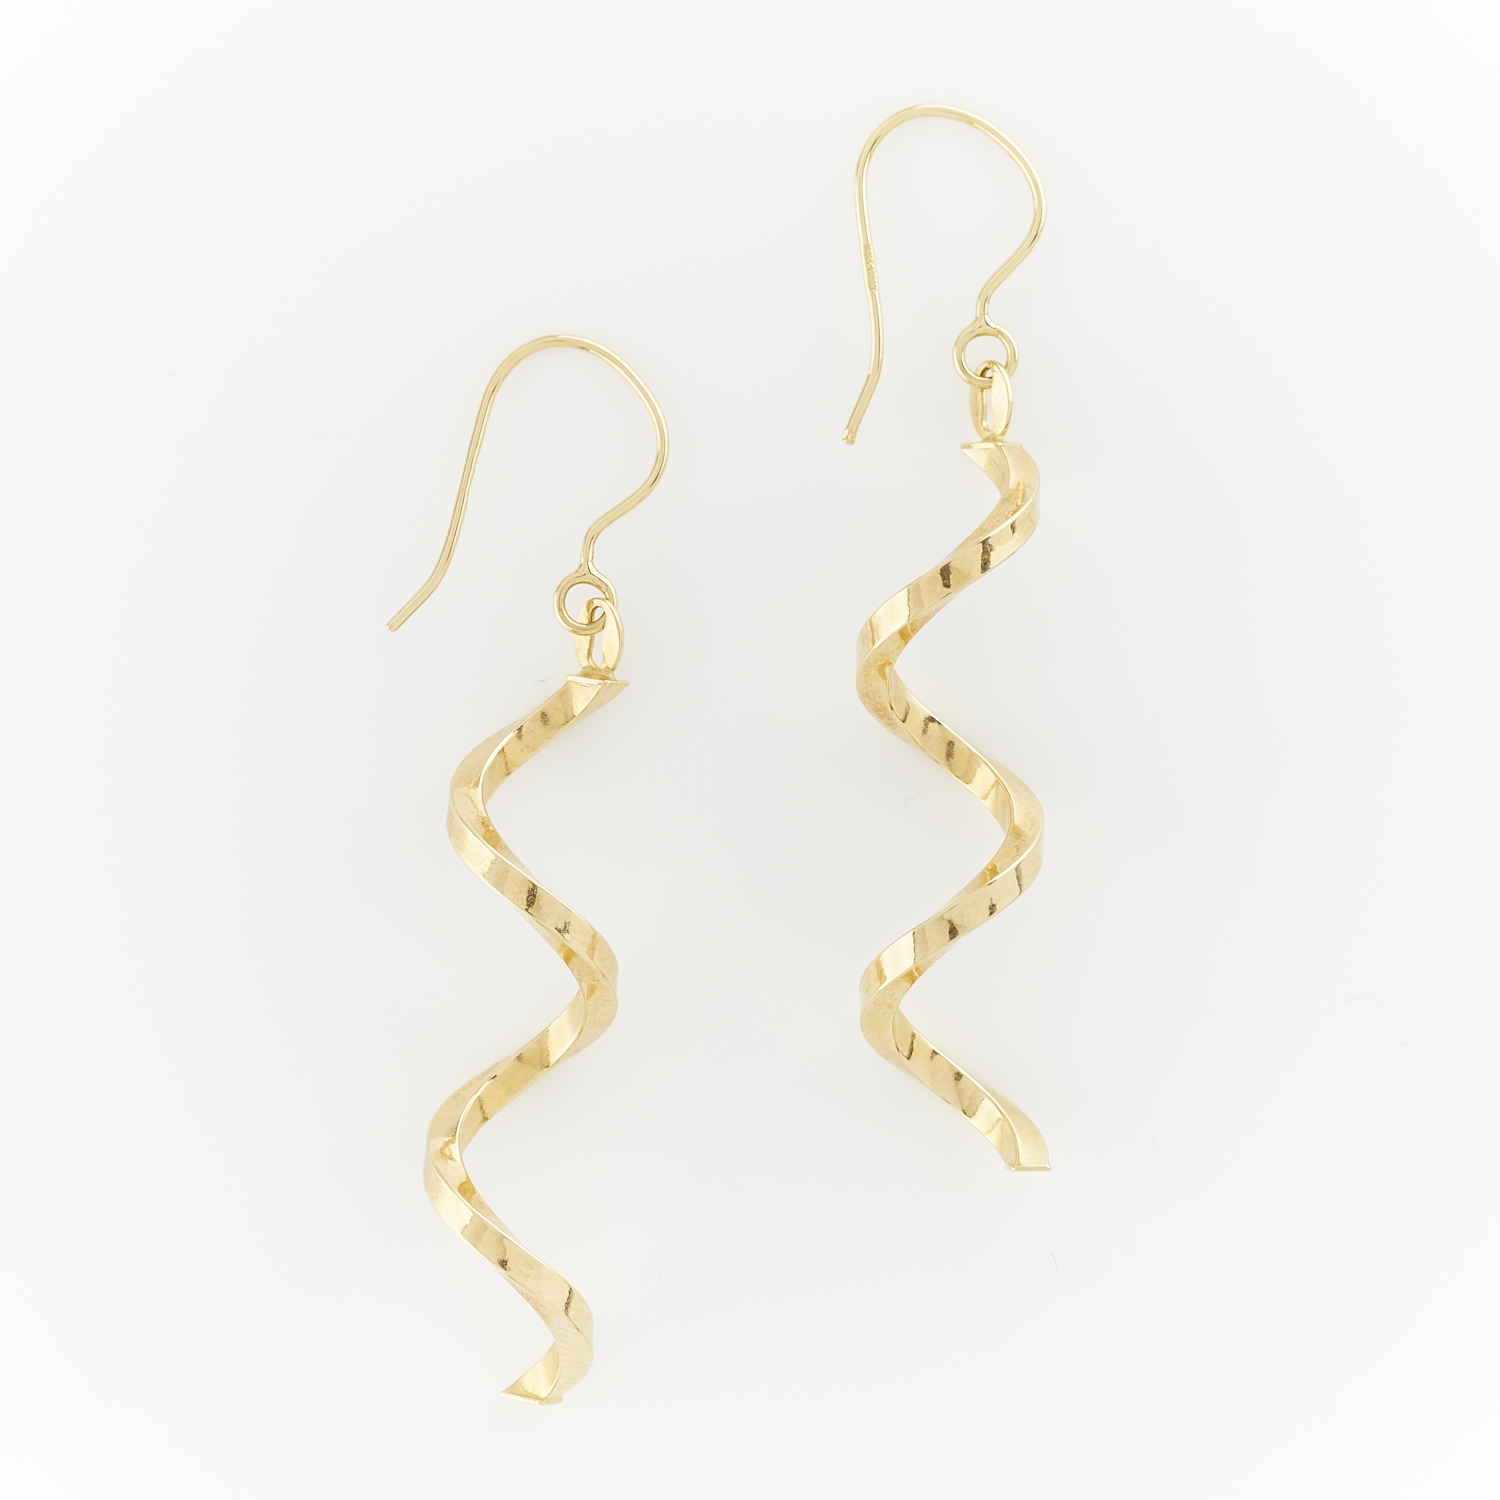 Italian 14k Yellow Gold Spiral Statement Earrings - Image 2 of 8